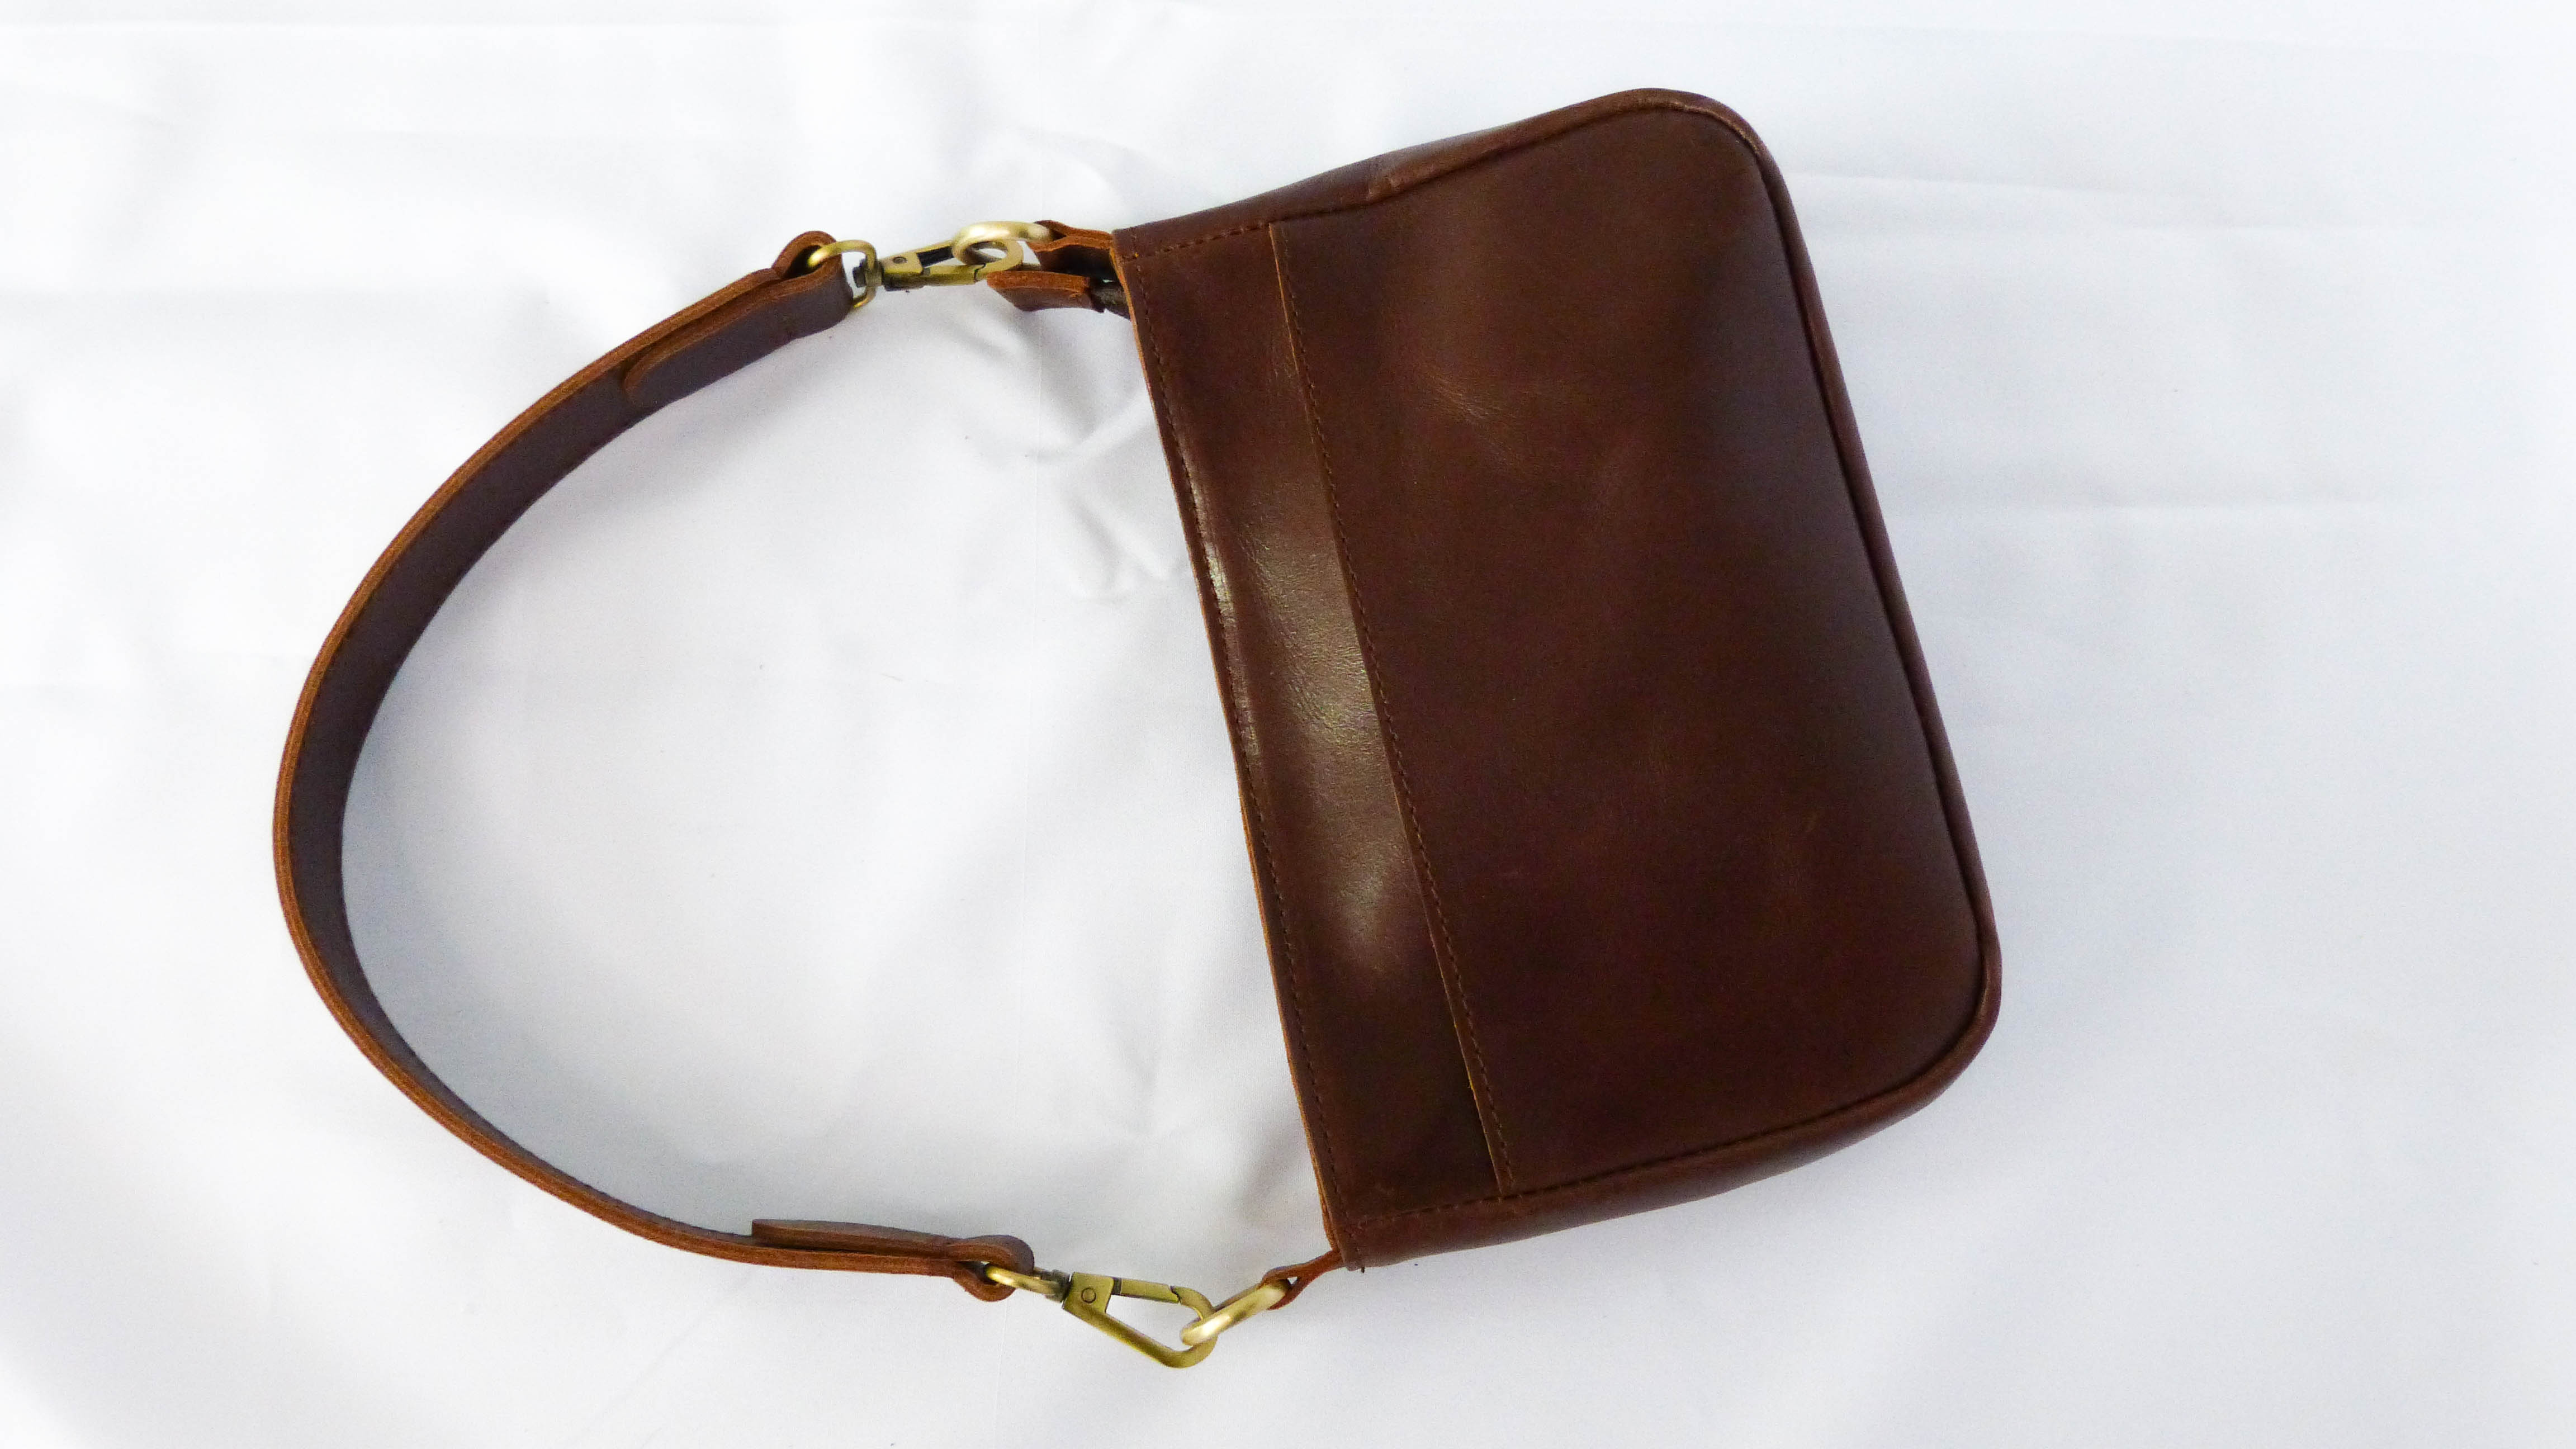 A brown leather Jessica purse with removable strap, zippered top, inside pocket, and outside phone pocket. Handmade by Ethiopian artisans for Madeline Parks Designs.